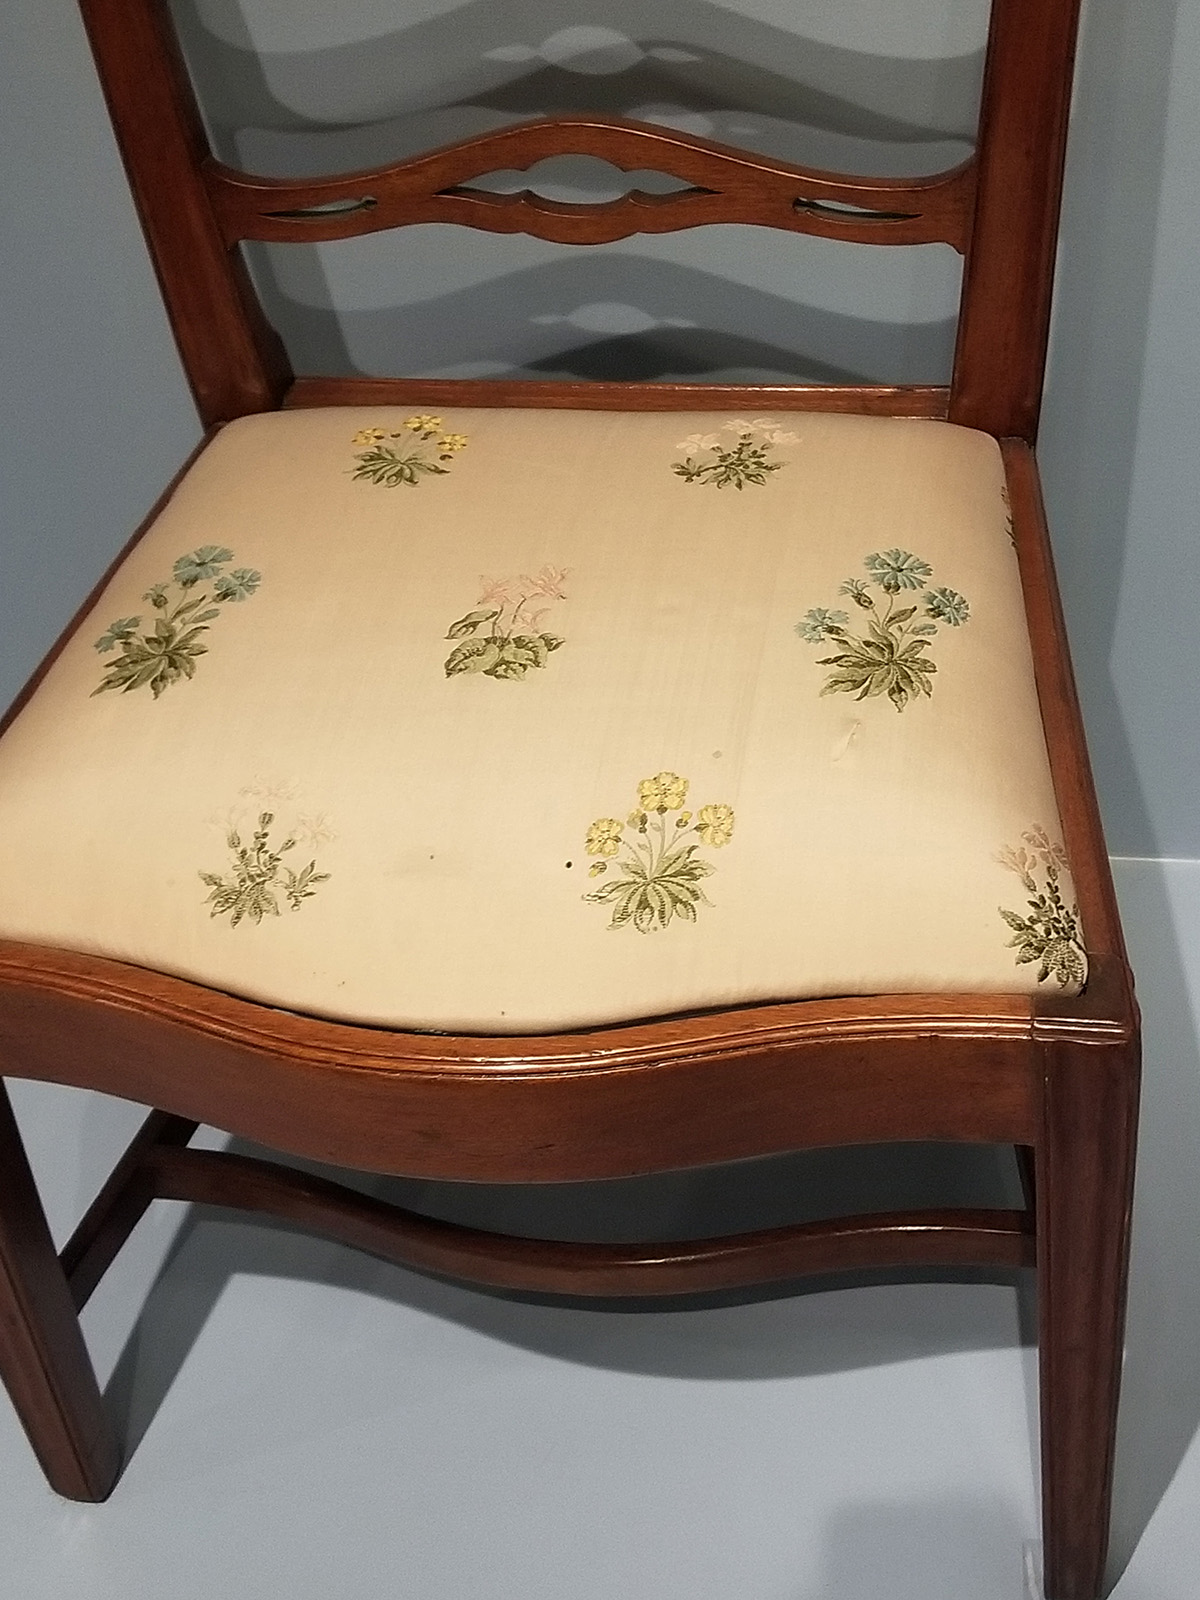 A chair with a faded fabric seat featuring embroidered flowers